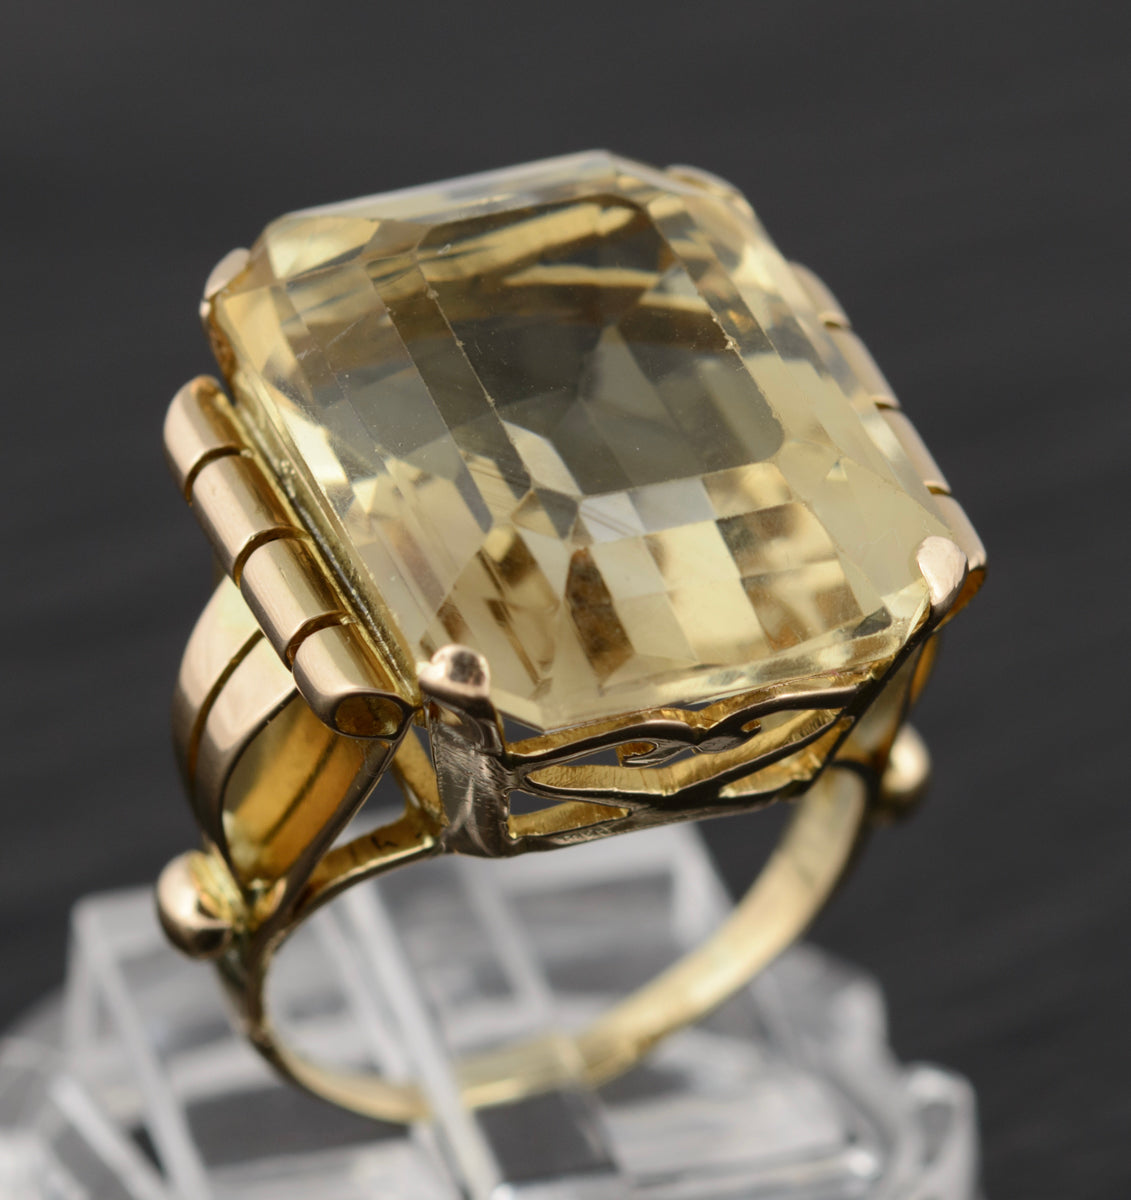 Vintage 18ct Gold Ring With Huge 17 Carat Emerald Cut Citrine Statement Jewelry  (A1506)